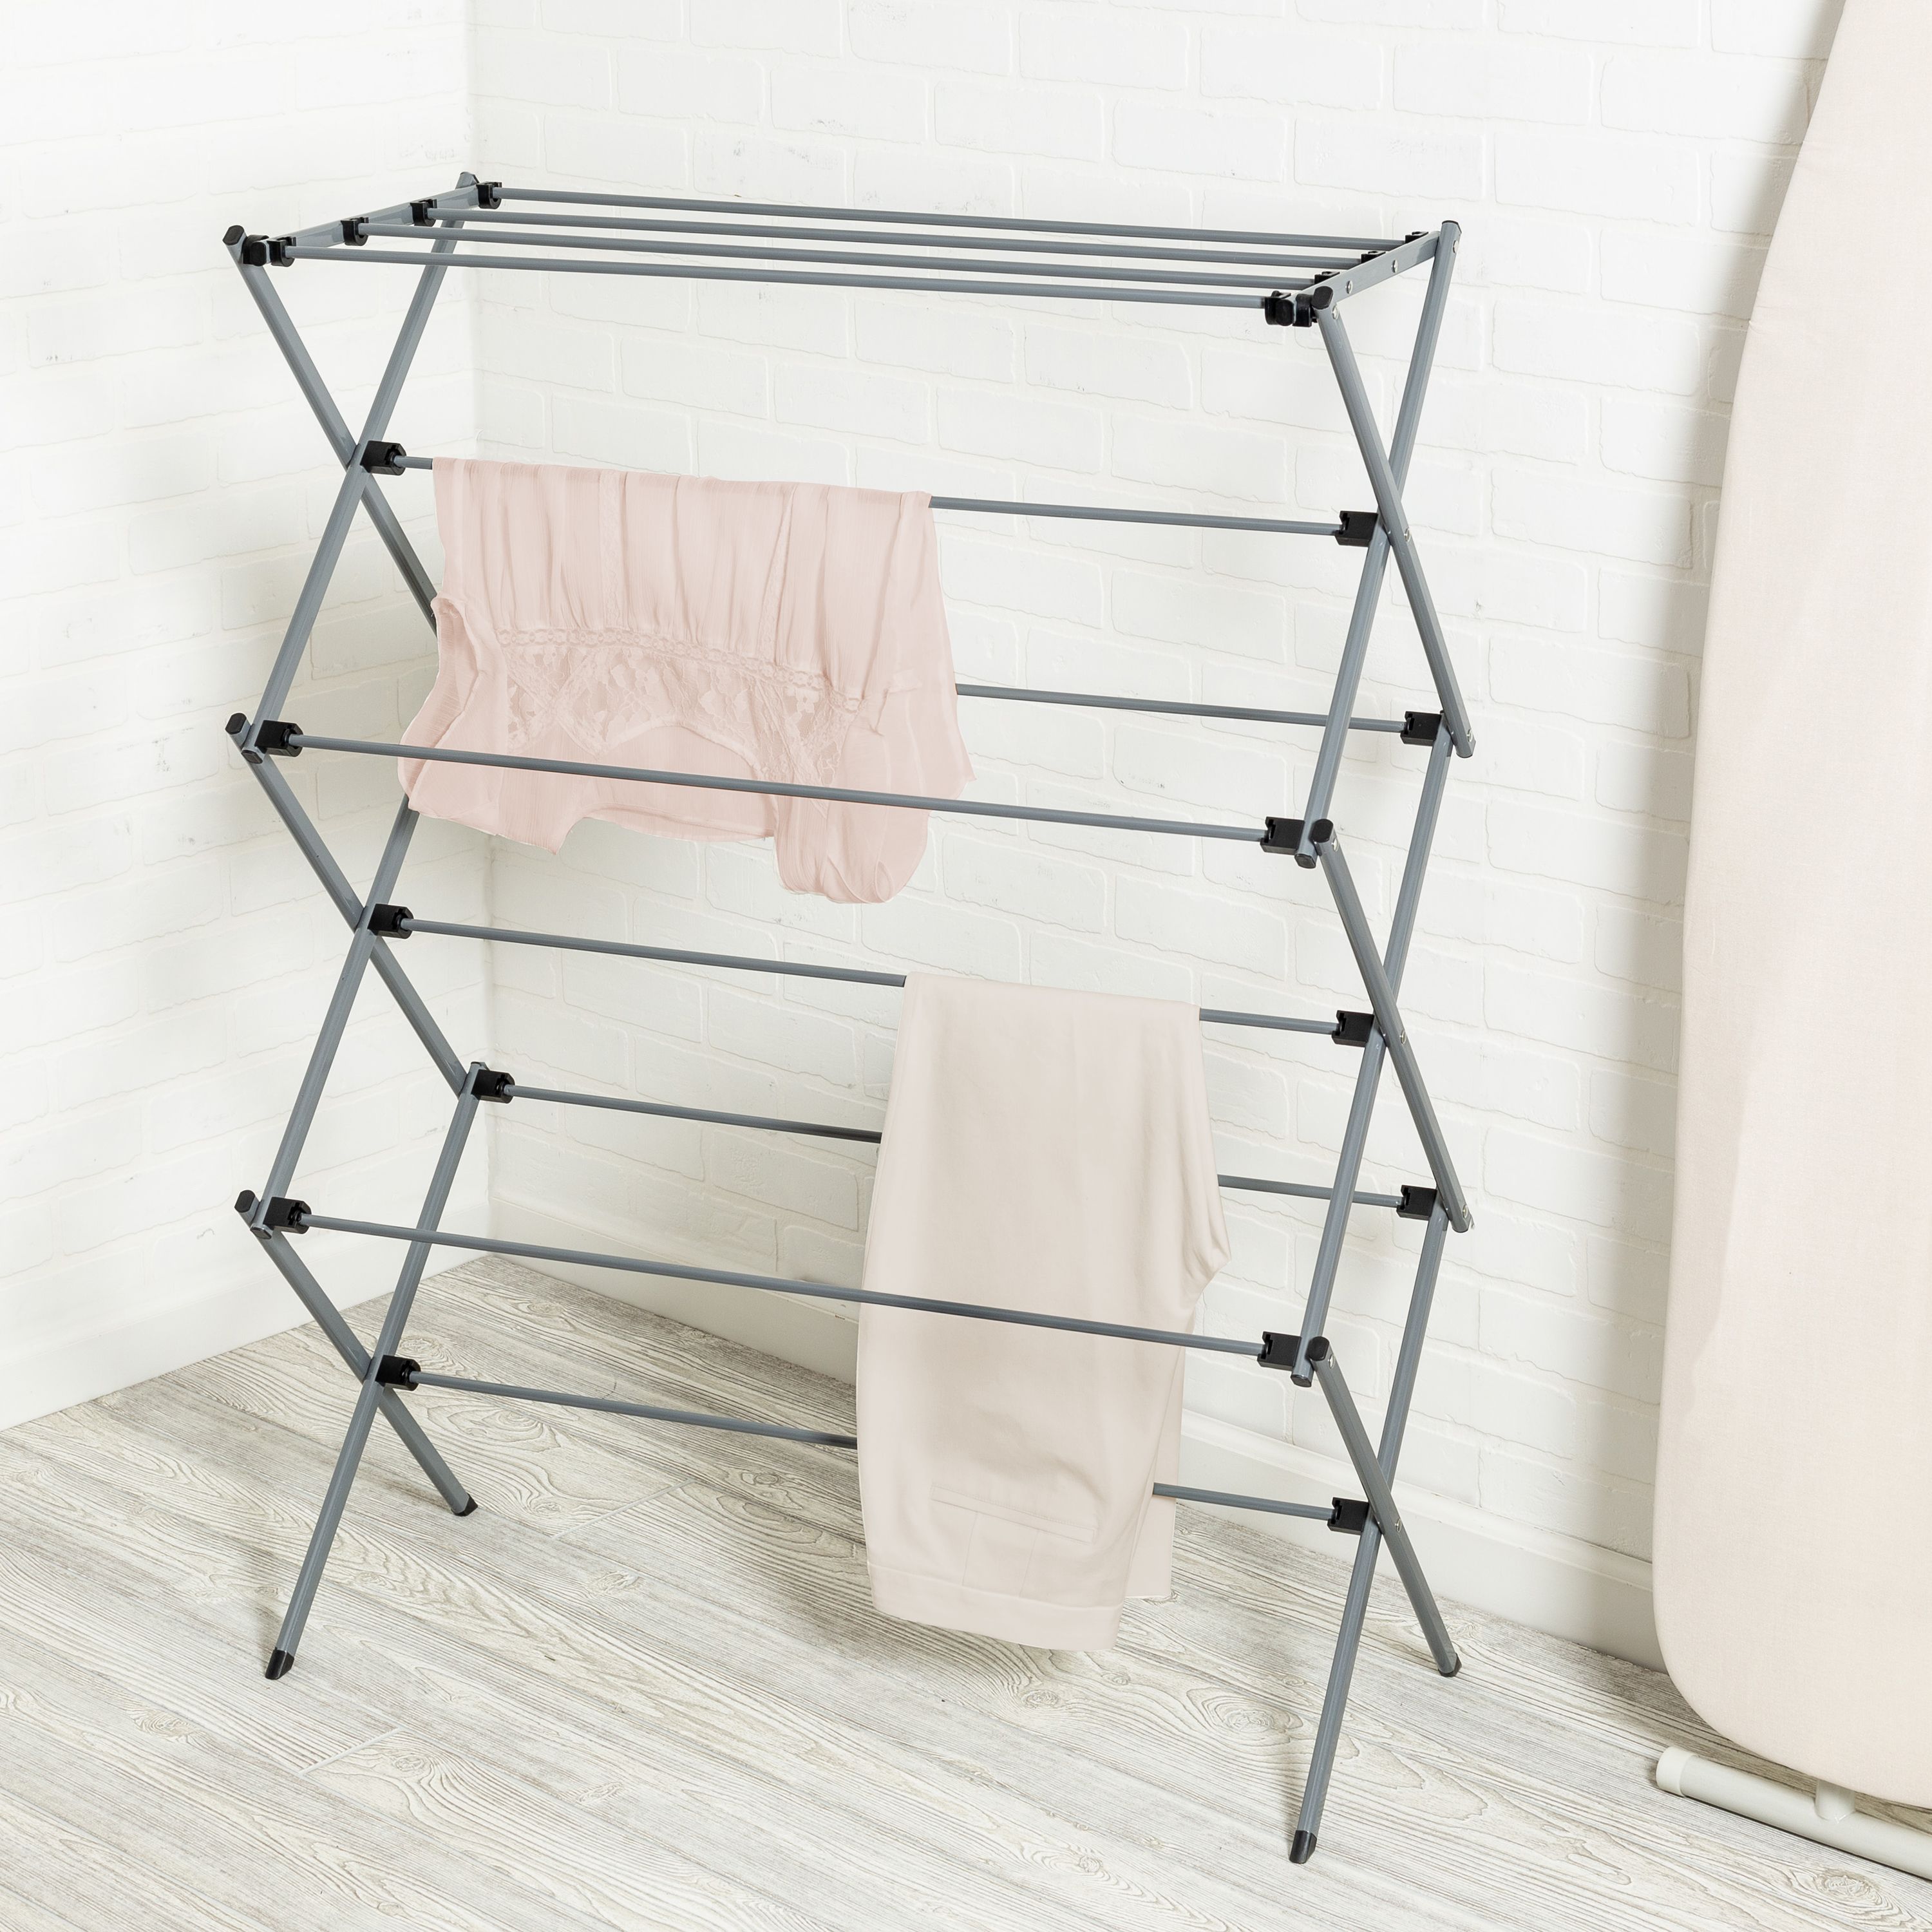 Honey-Can-Do Folding Metal Clothes Drying Rack, Gray - image 5 of 9